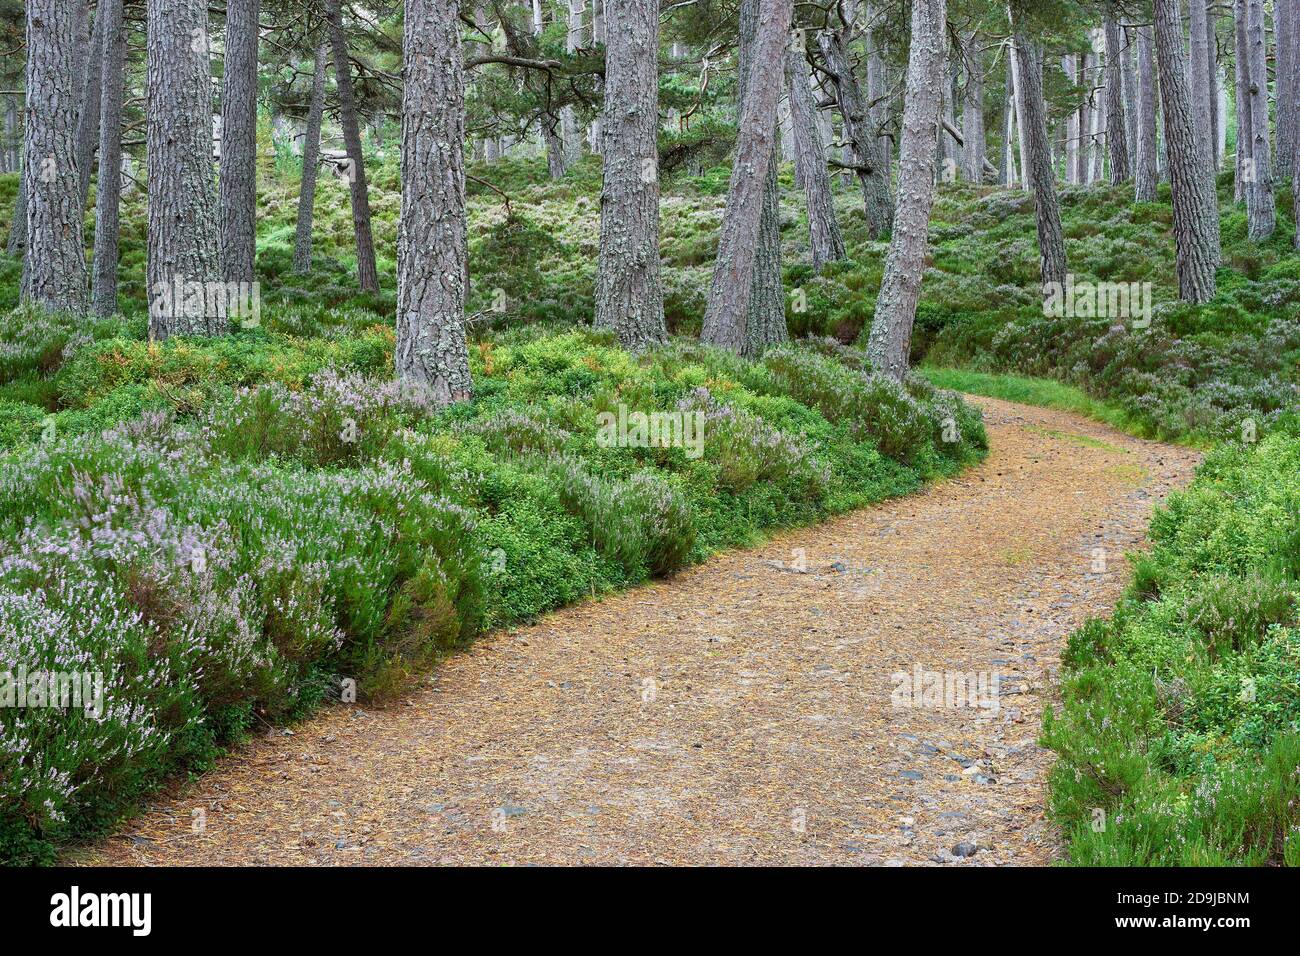 Track through woodland in the Ballochbuie Forest, part of the Balmoral Estate, near Braemar, Aberdeenshire, Scotland. Stock Photo